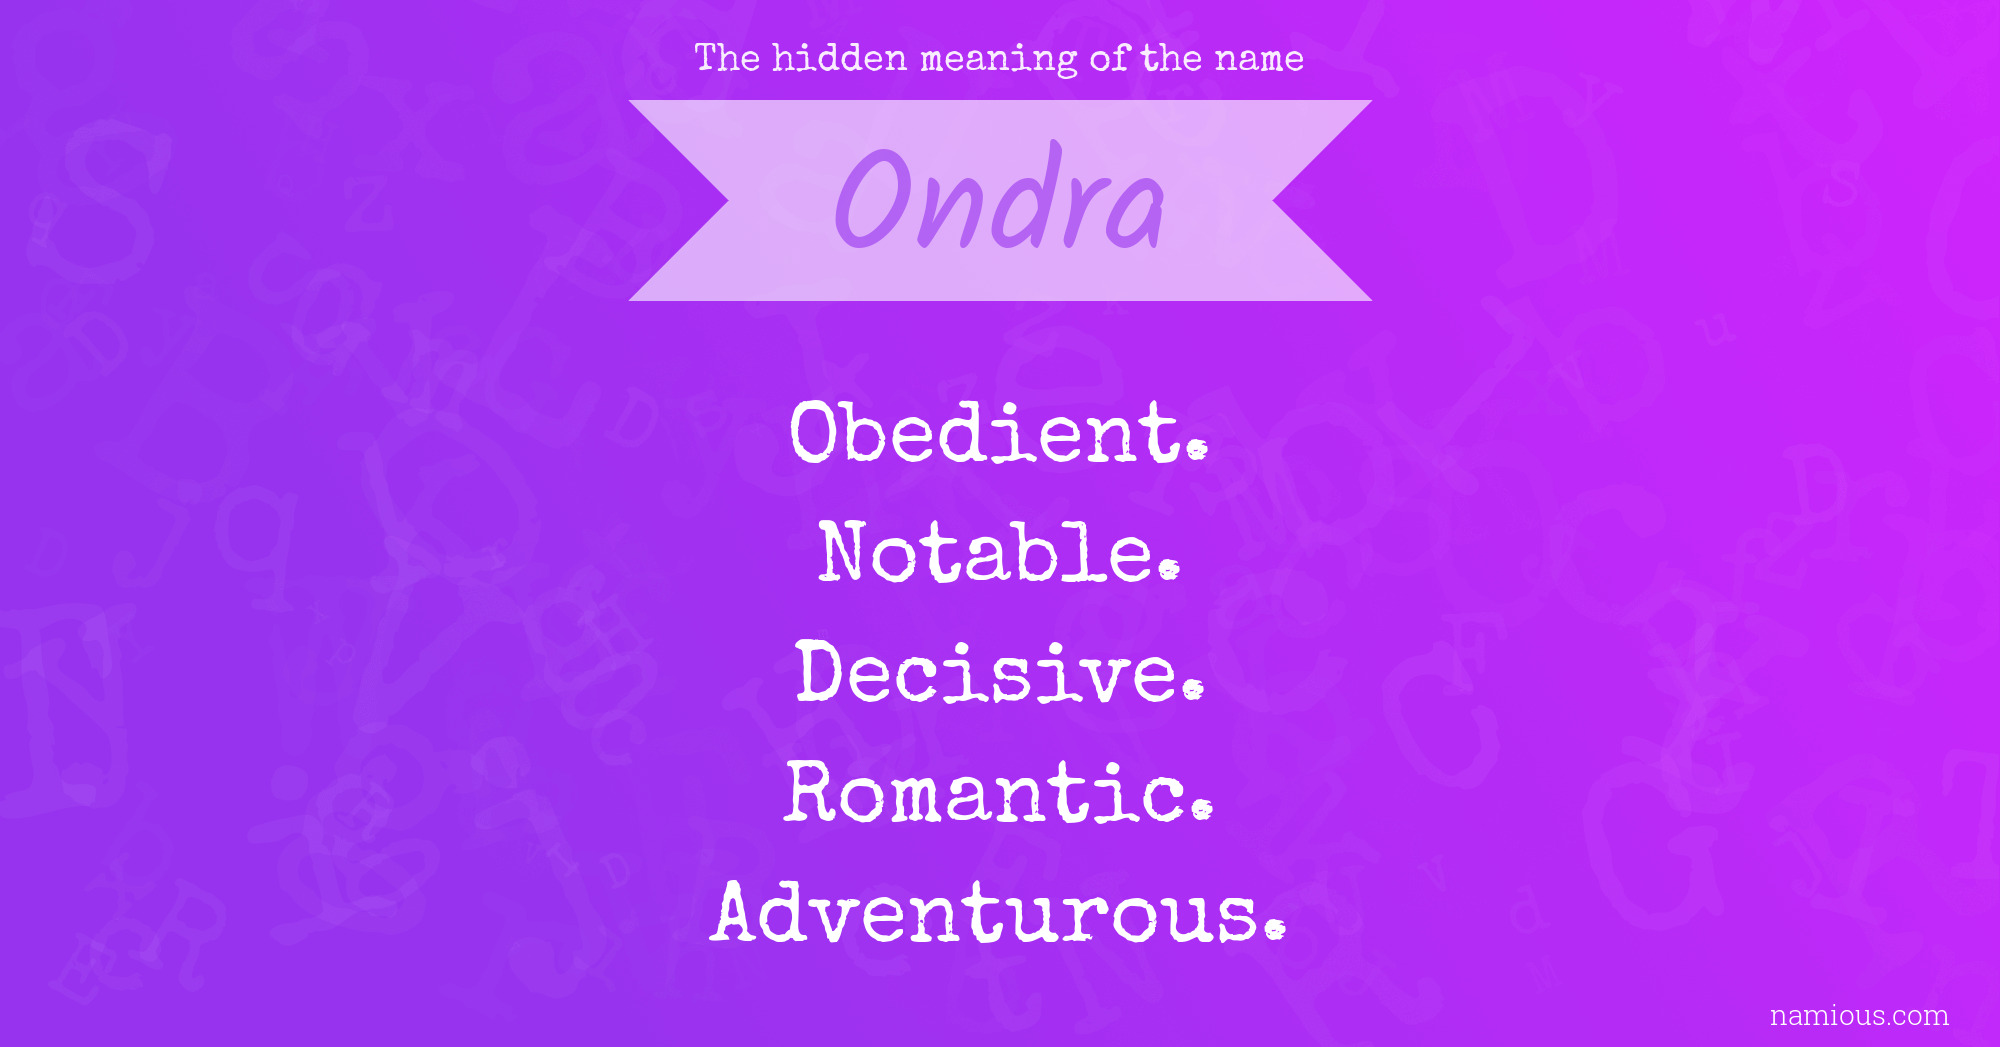 The hidden meaning of the name Ondra